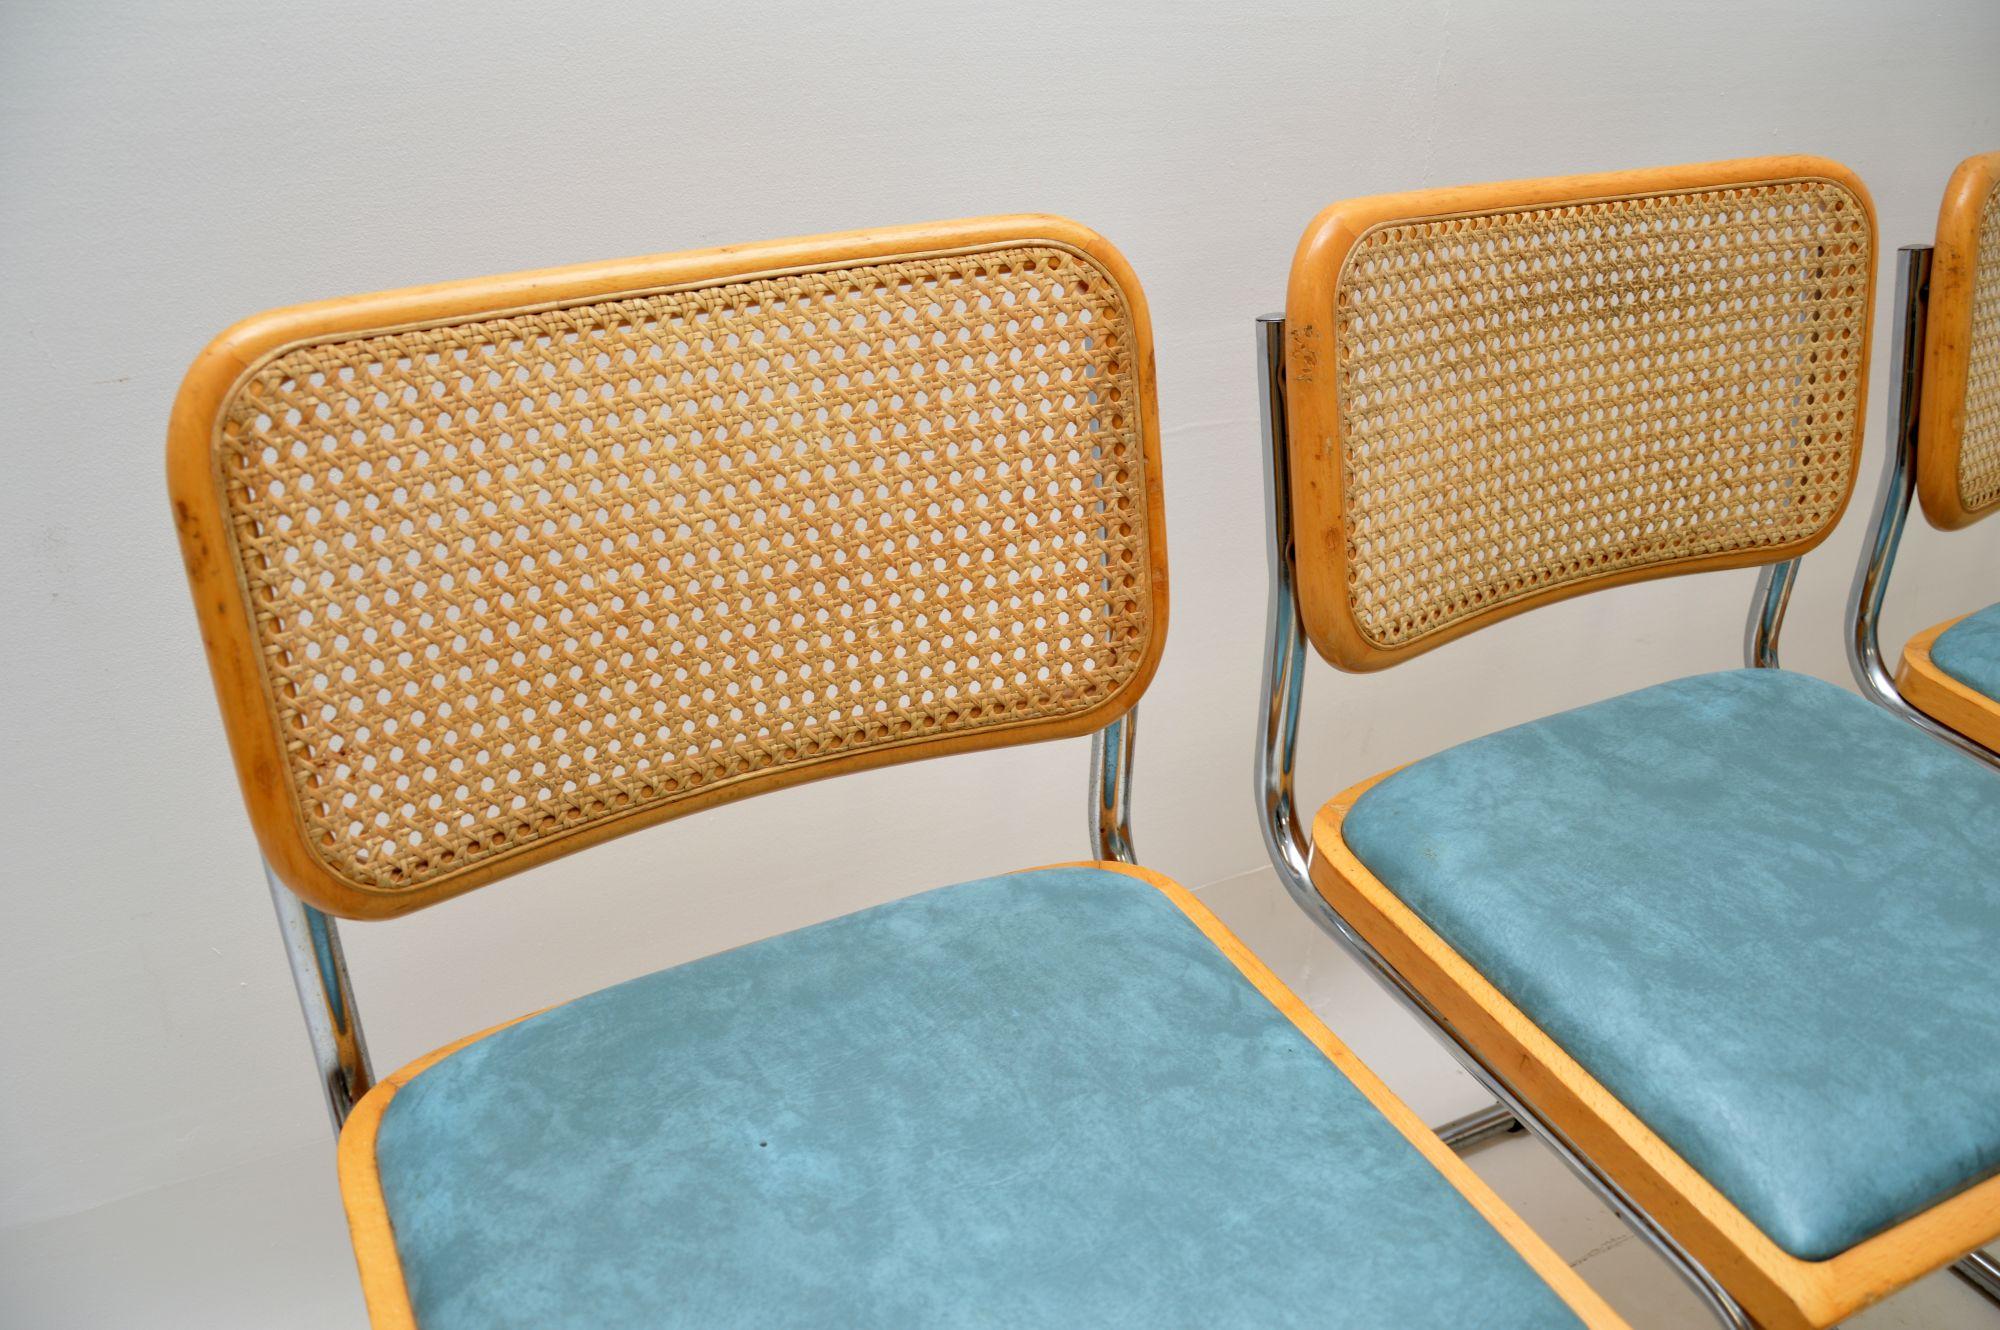 A stylish and iconic set of ‘Cesca’ dining chairs, originally designed by Marcel Breuer in the 1920s. These were made in Italy, they date from around the 1970s. We have paired them with a fantastic glass vintage dining table, also from the